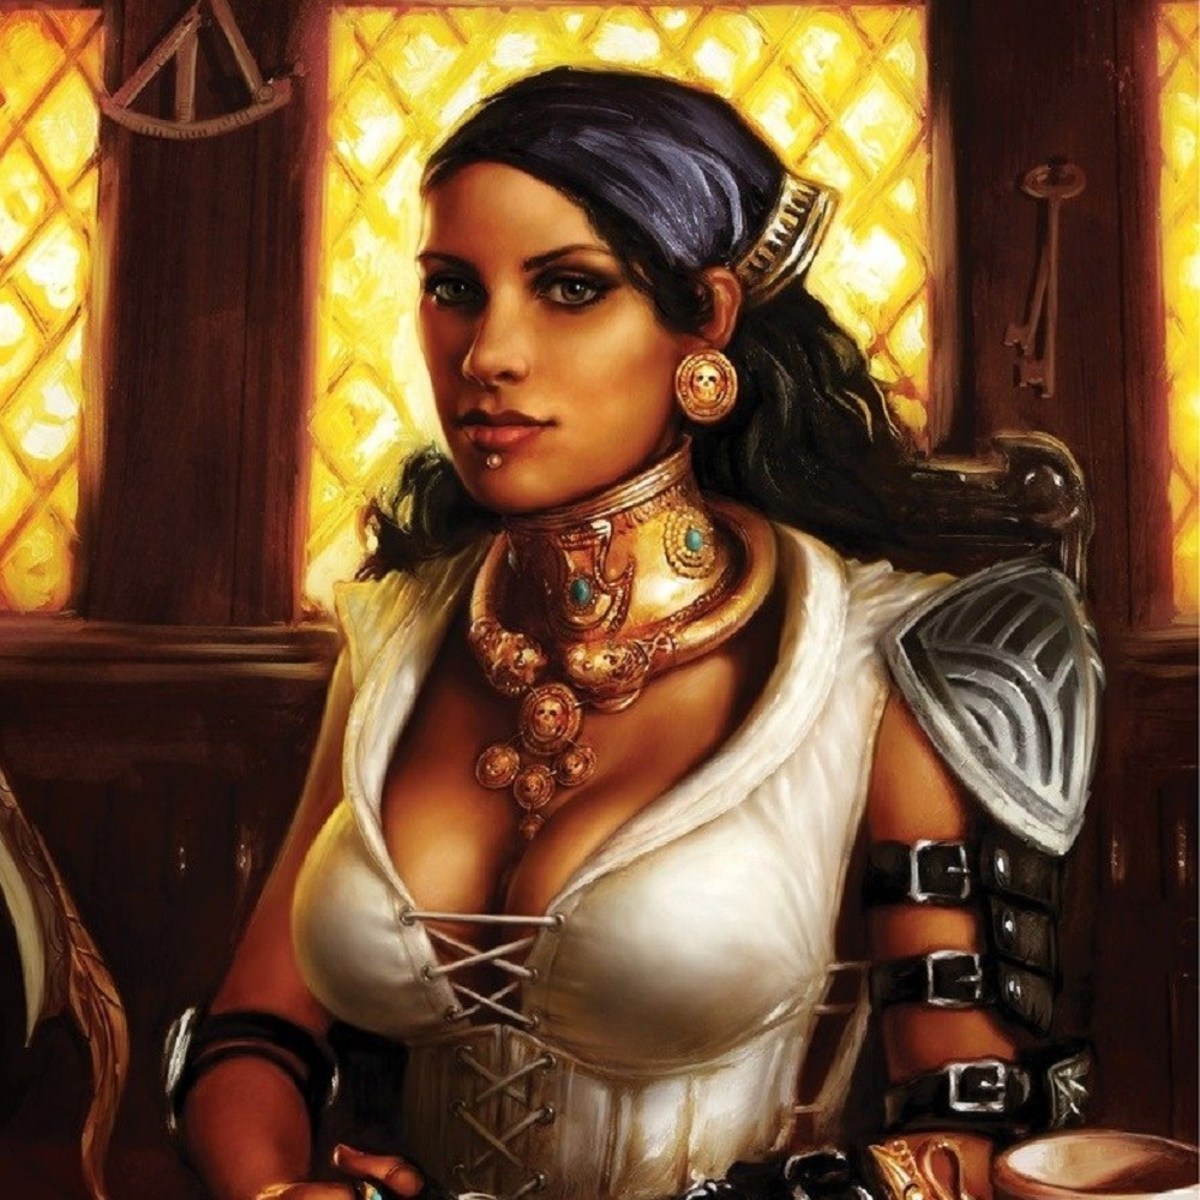 Isabela in the comic "Those Who Speak."